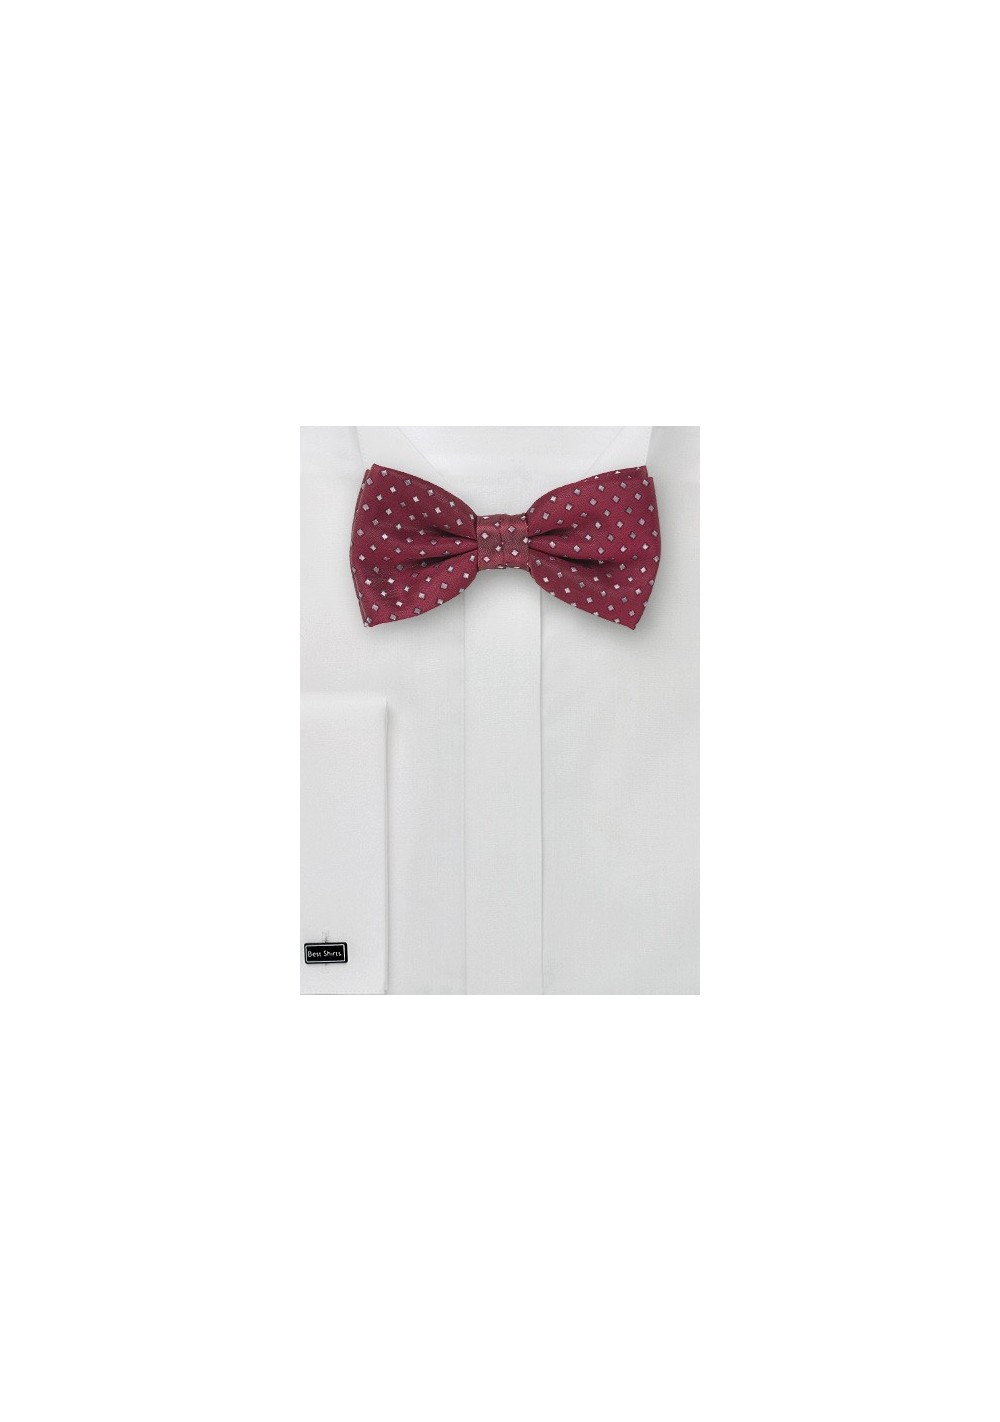 Red Bow Ties - Bow Tie & Matching Pocket Square Set